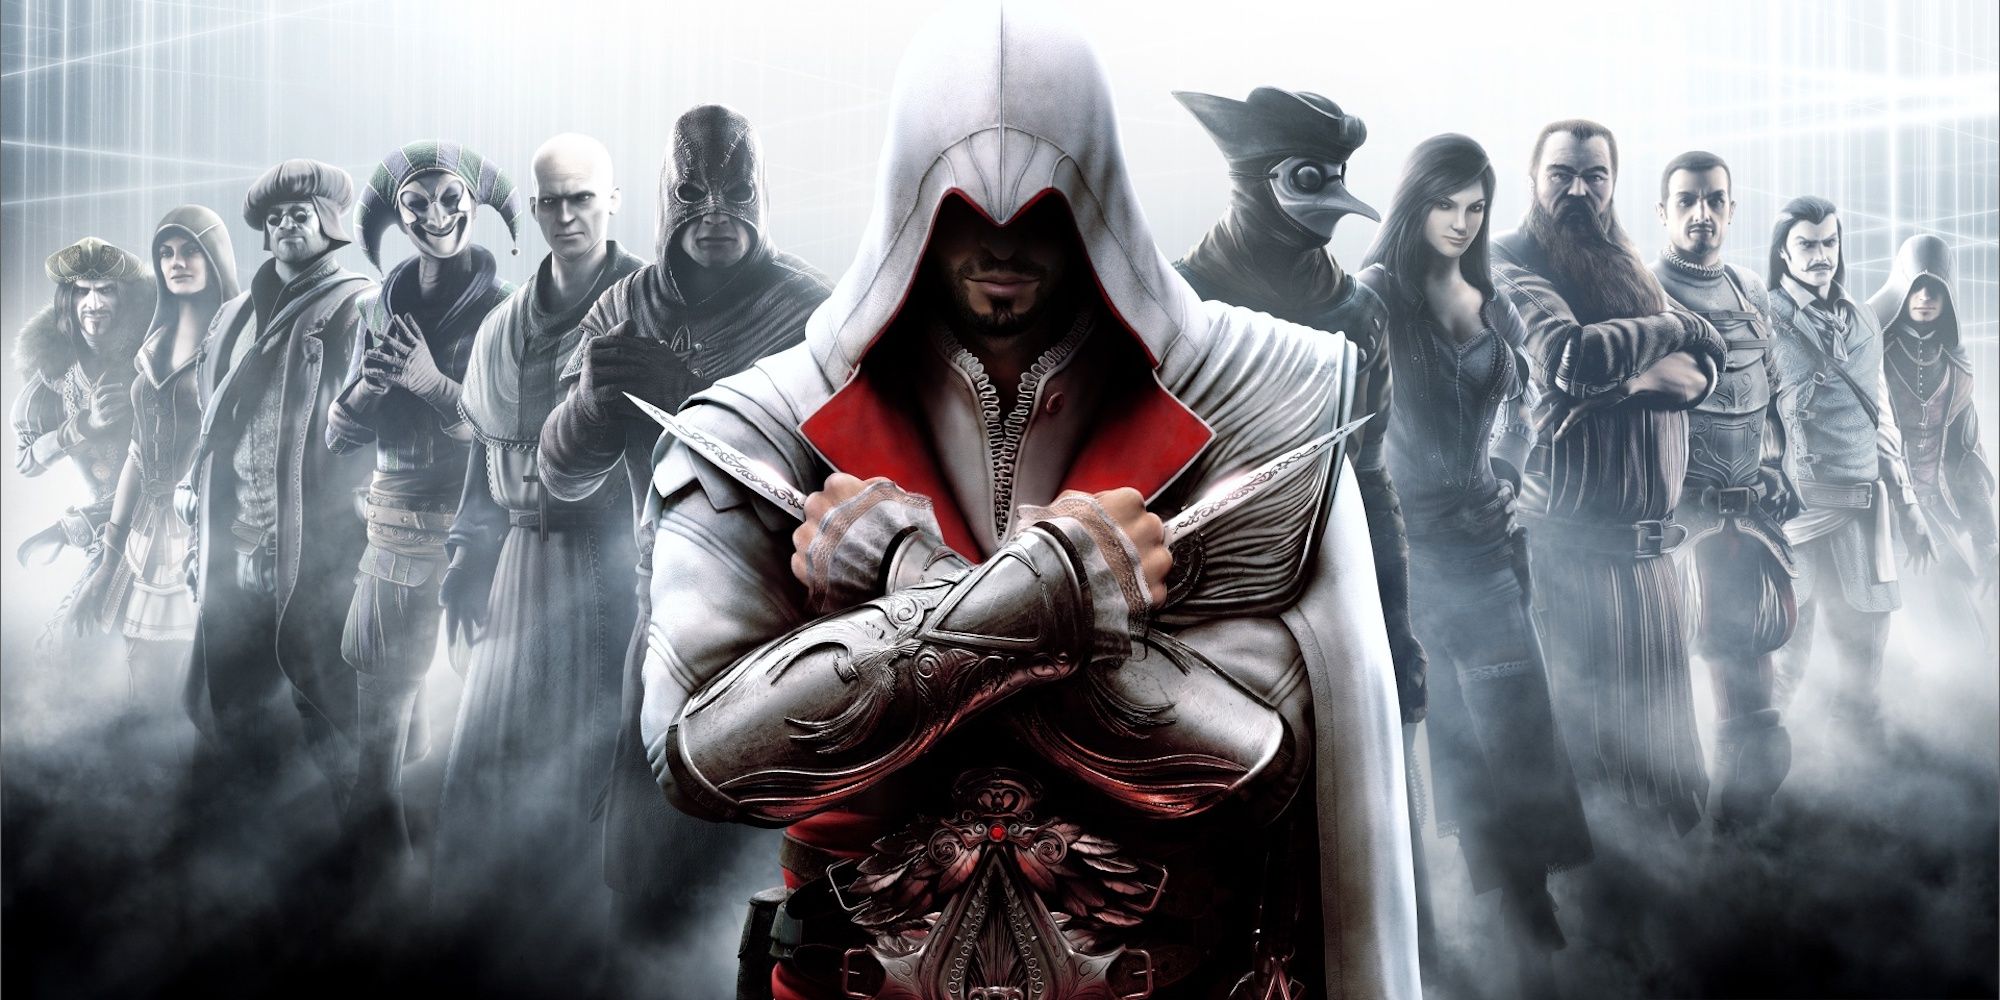 Ezio stands in front of other assassins in Assassin’s Creed: Brotherhood